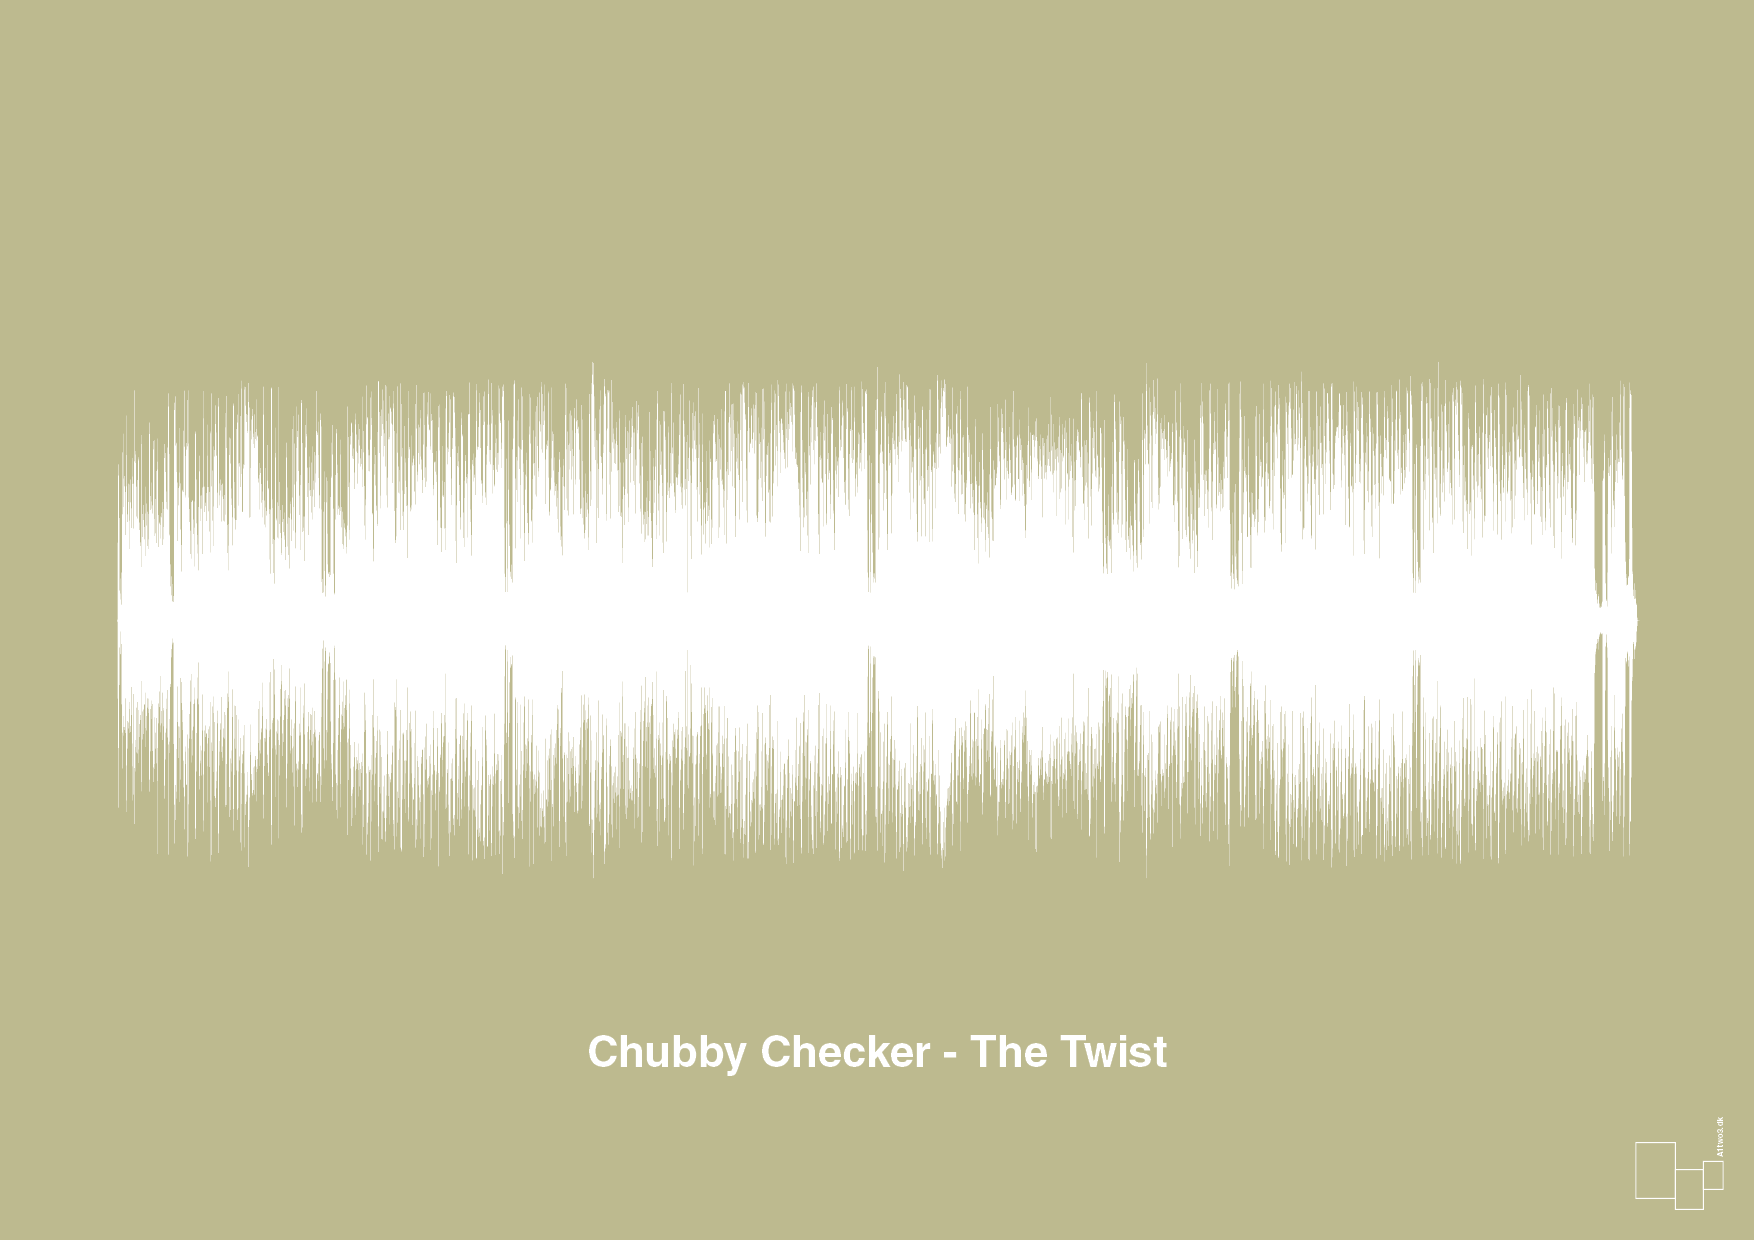 chubby checker - the twist - Plakat med Musik i Back to Nature